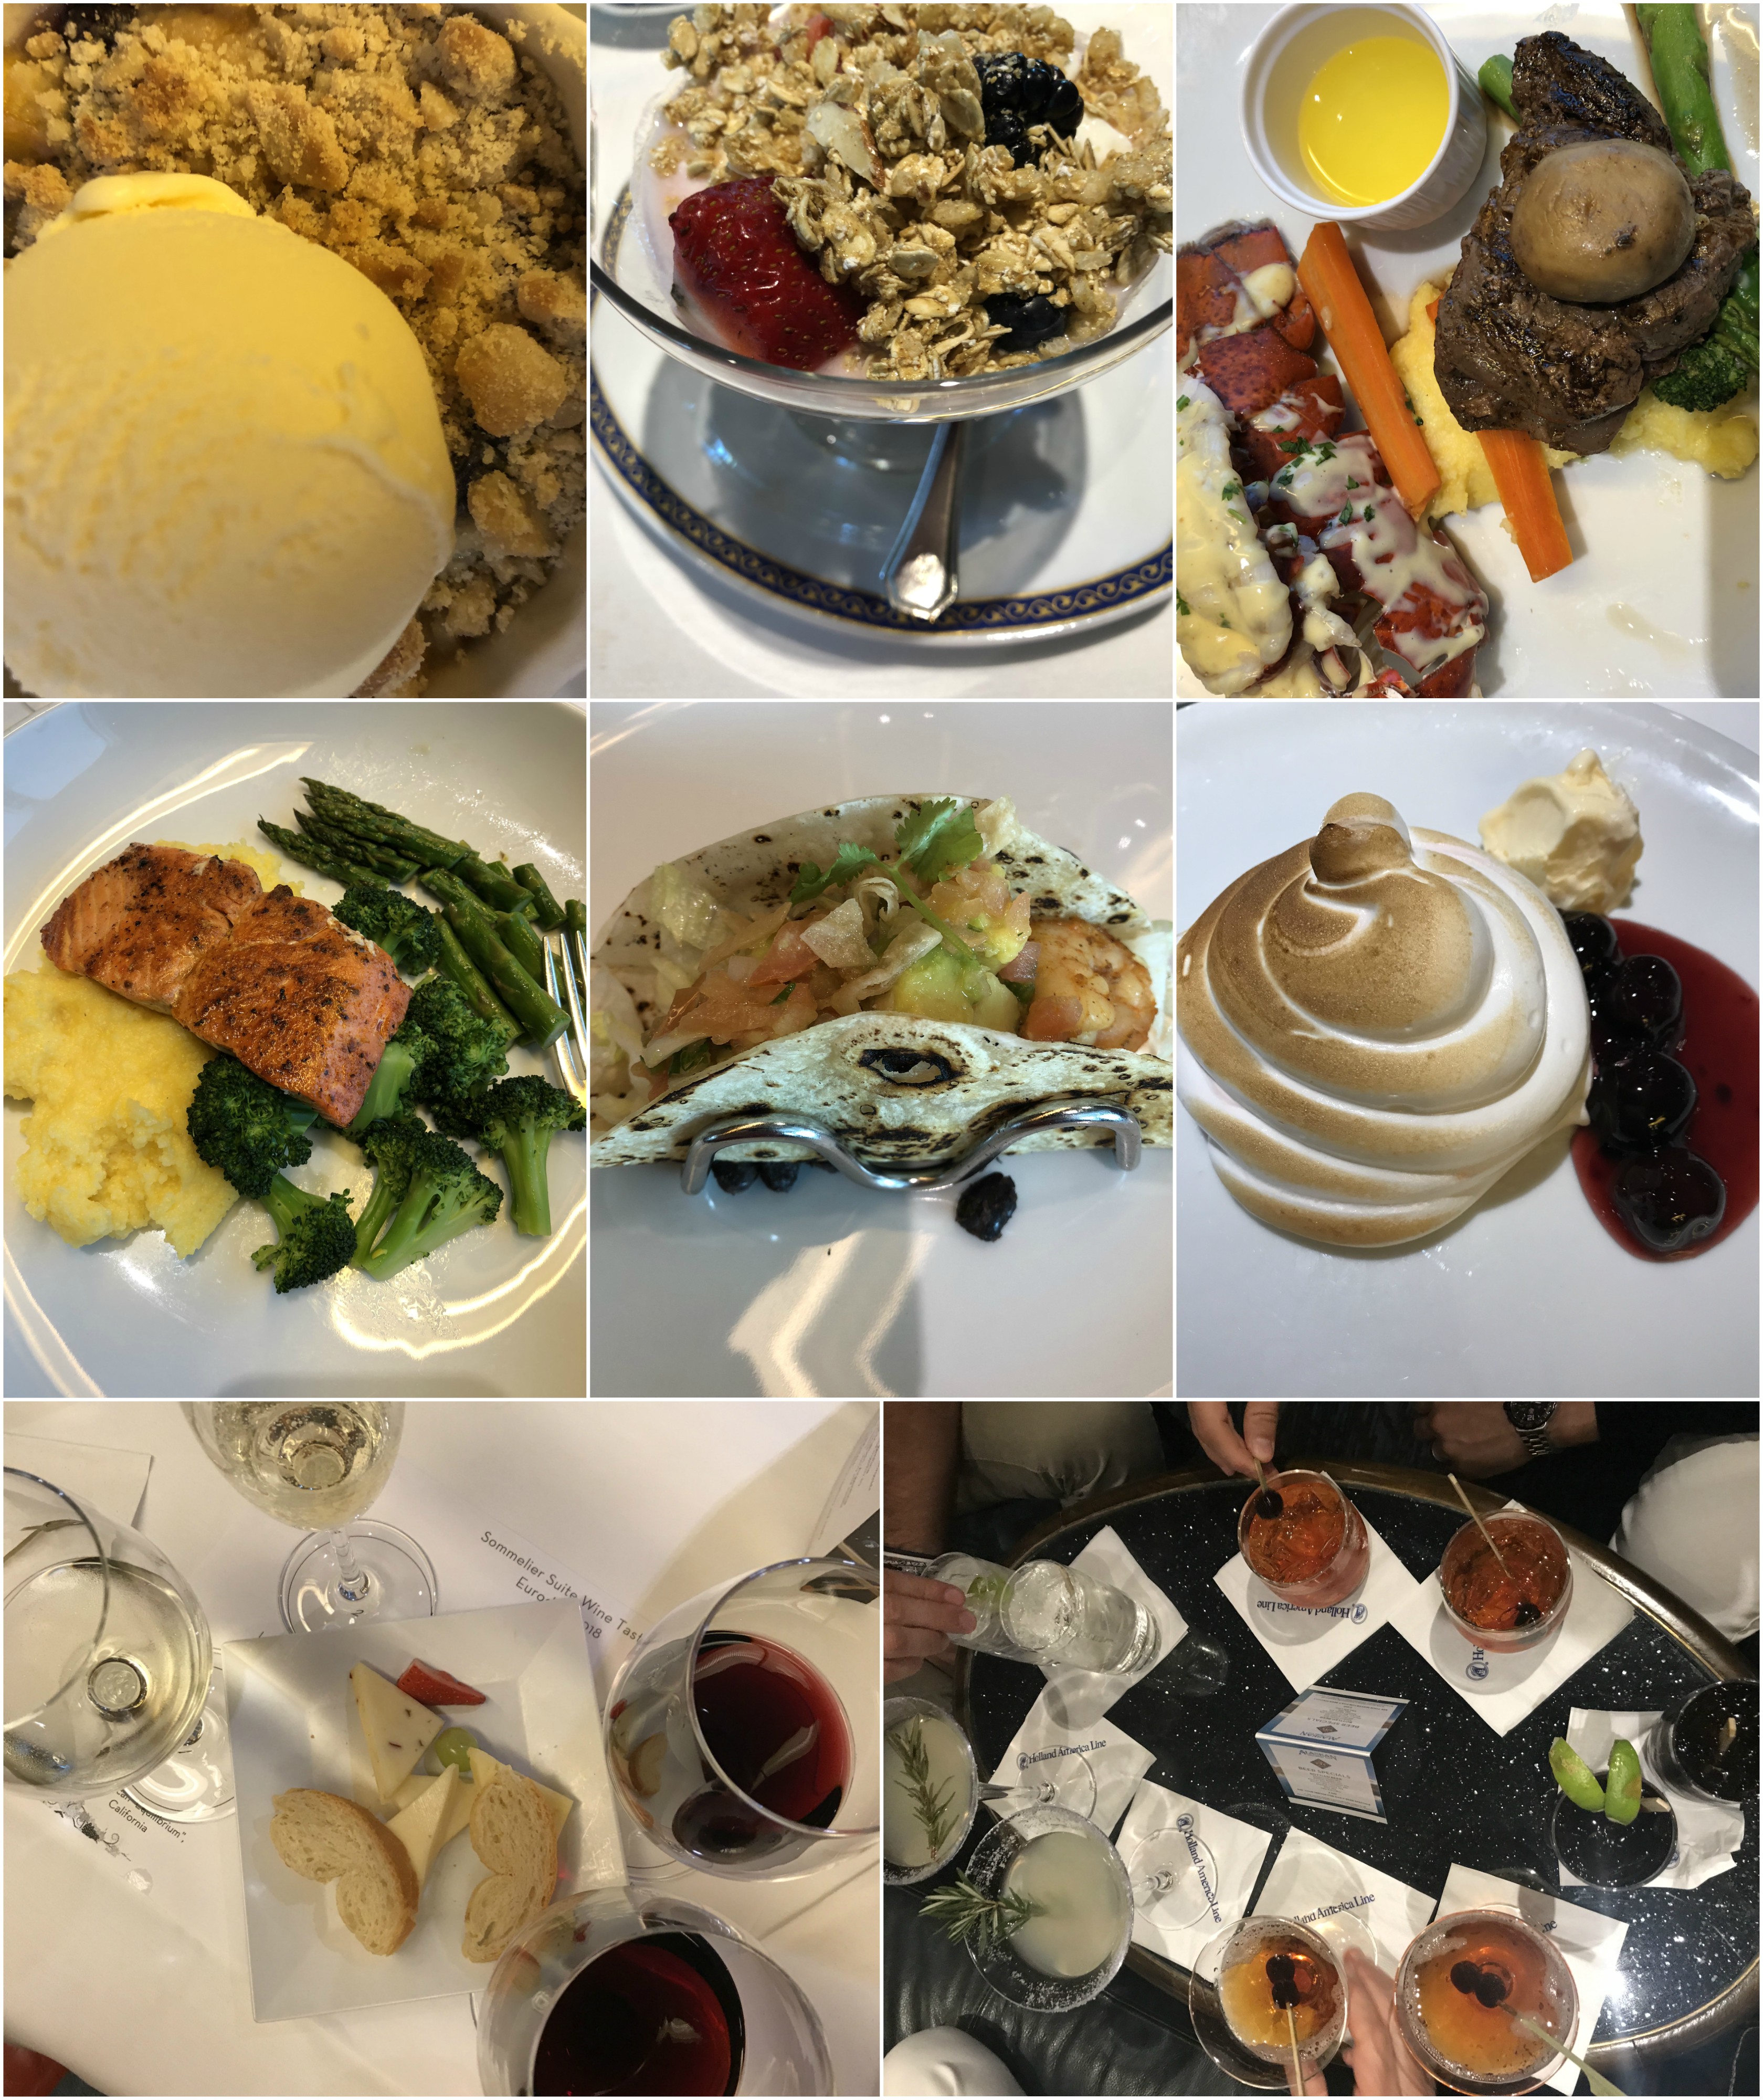 HollandAmericaFood - What I Really Thought About Our 7-Day Holland America Cruise To Alaska - Cruise To Alaska - Holland American Cruise Line - Alaska Itinerary - Communikait by Kait Hanson